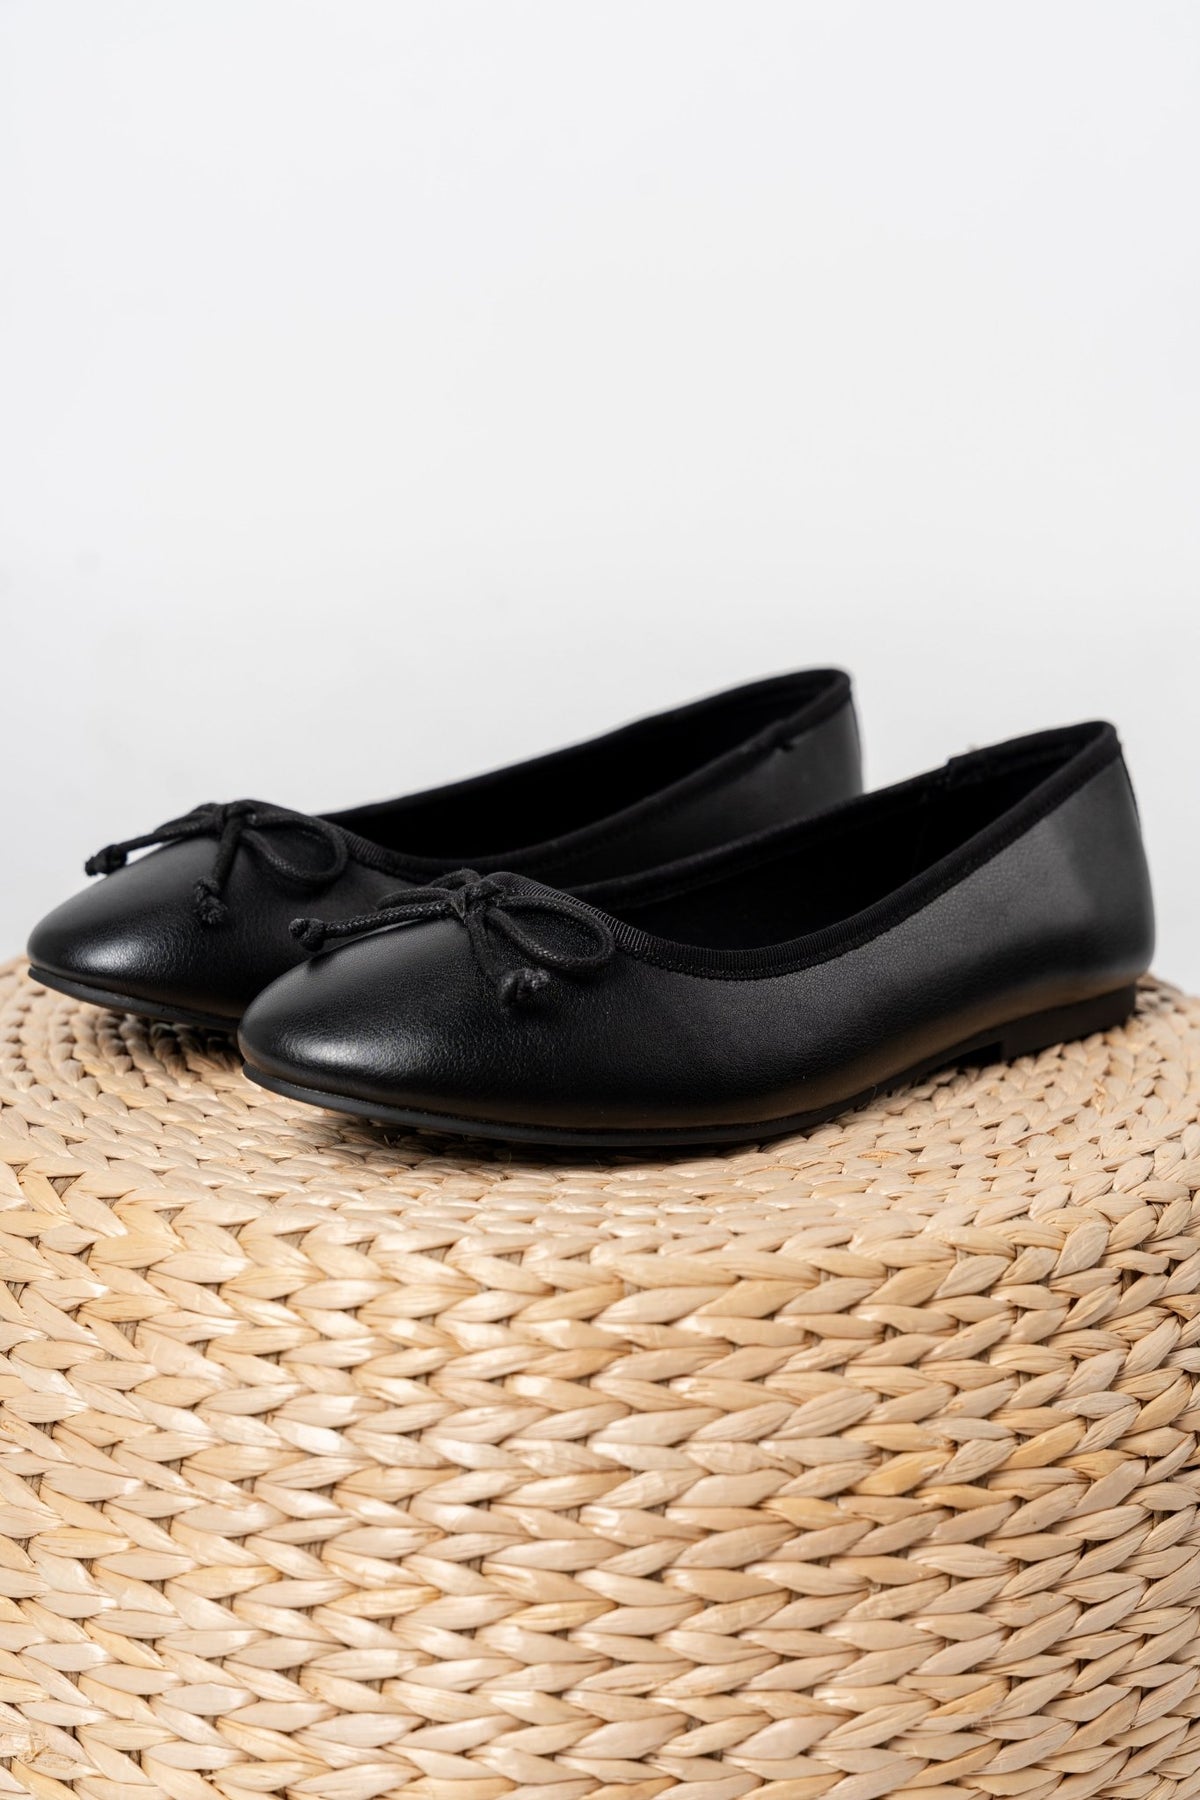 Jobin ballet flat black - Affordable shoes - Boutique Shoes at Lush Fashion Lounge Boutique in Oklahoma City